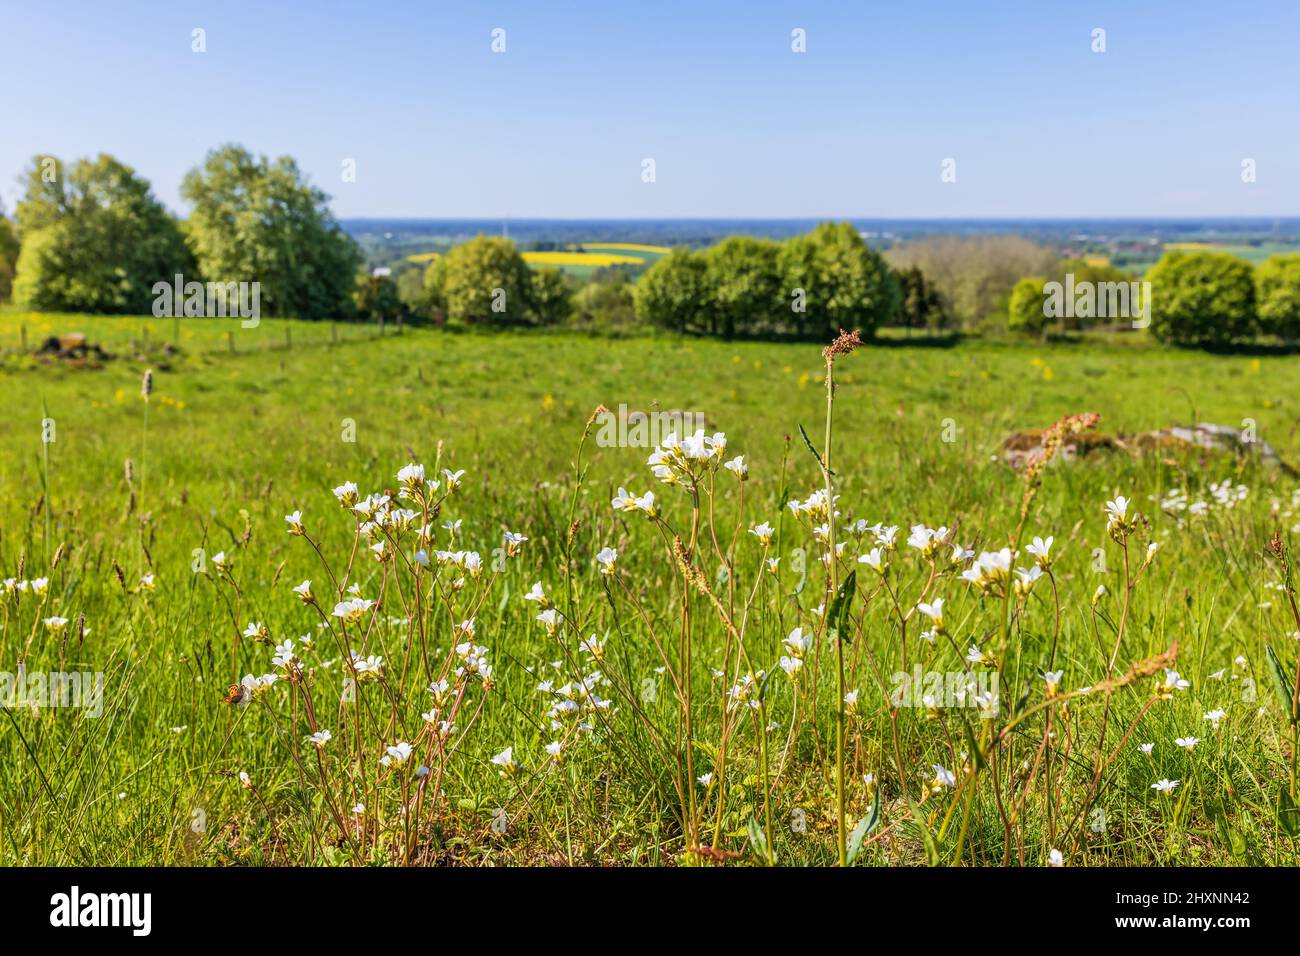 Meadow saxifrage flowers on a meadow Stock Photo